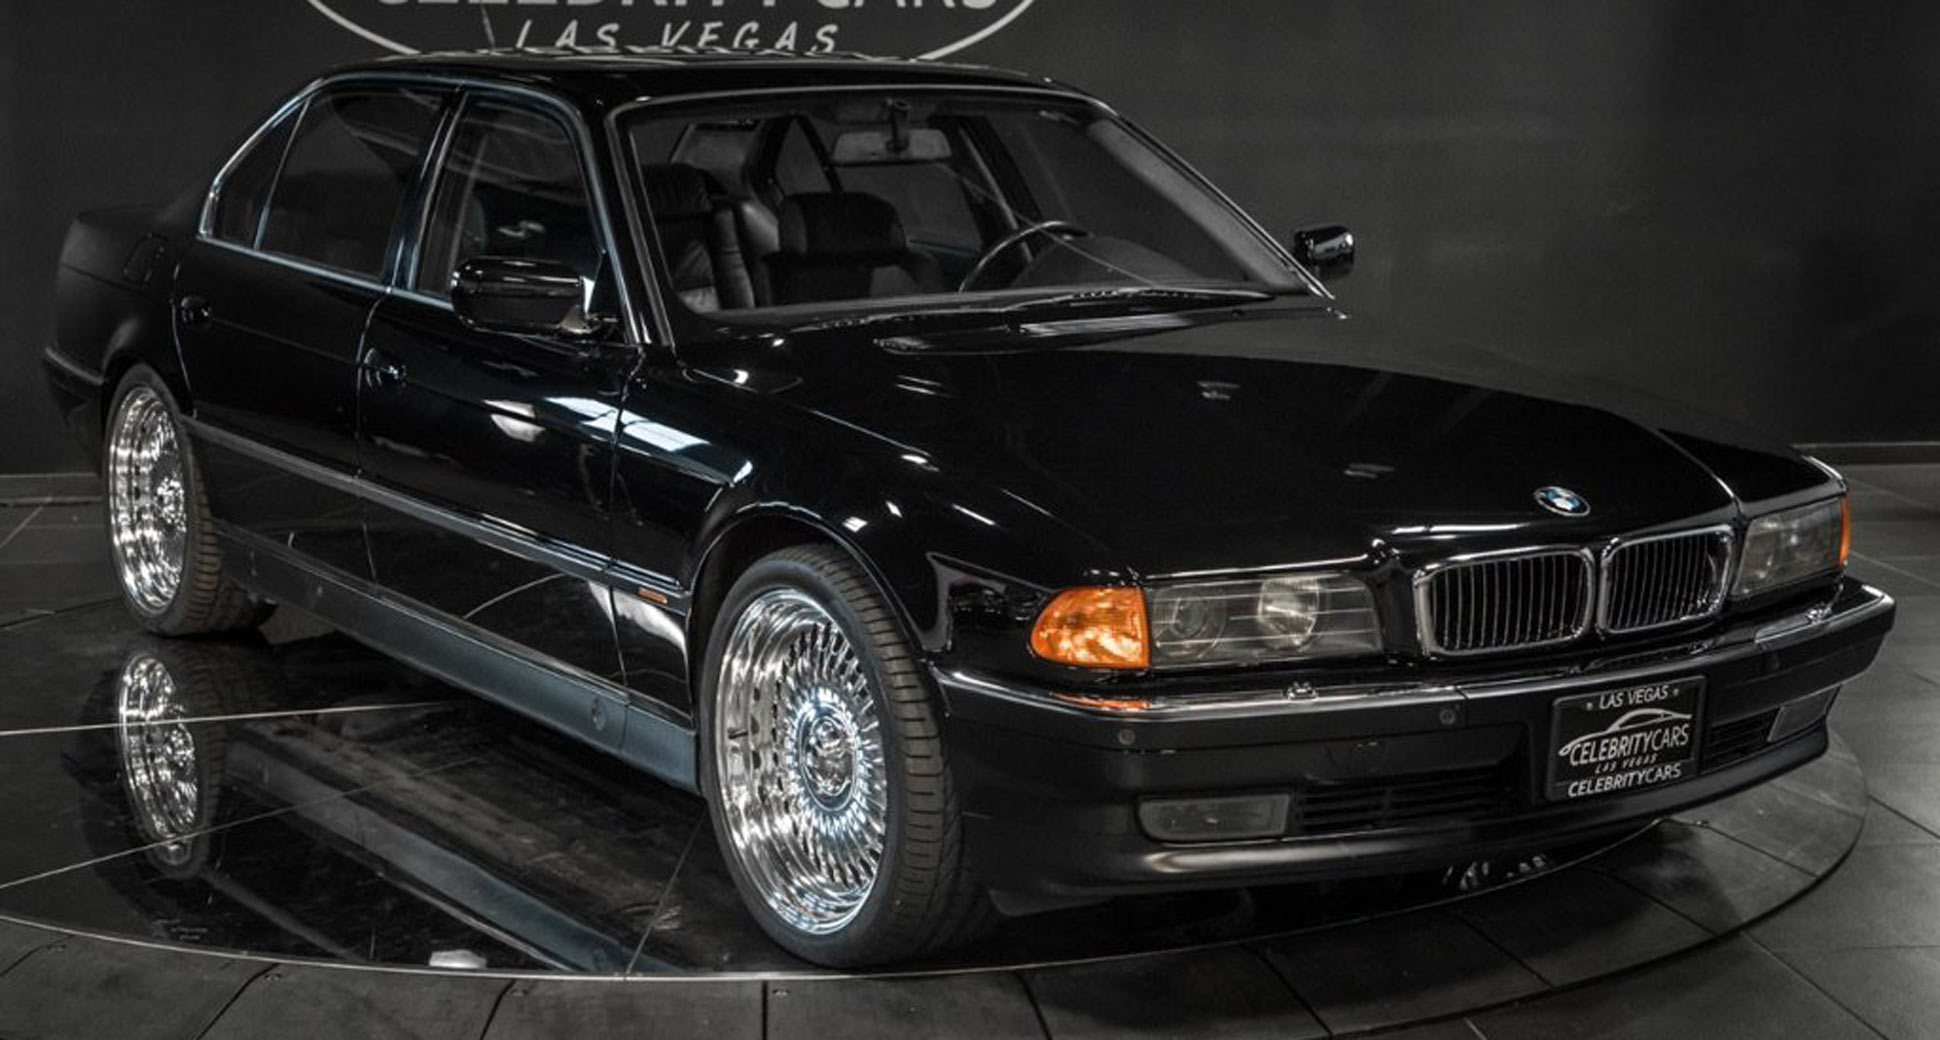 Porn Star Selling Cars - The BMW 750iL That Tupac Was Shot Still Available For Sale, Only Now It  Costs $1.75 Million | Carscoops